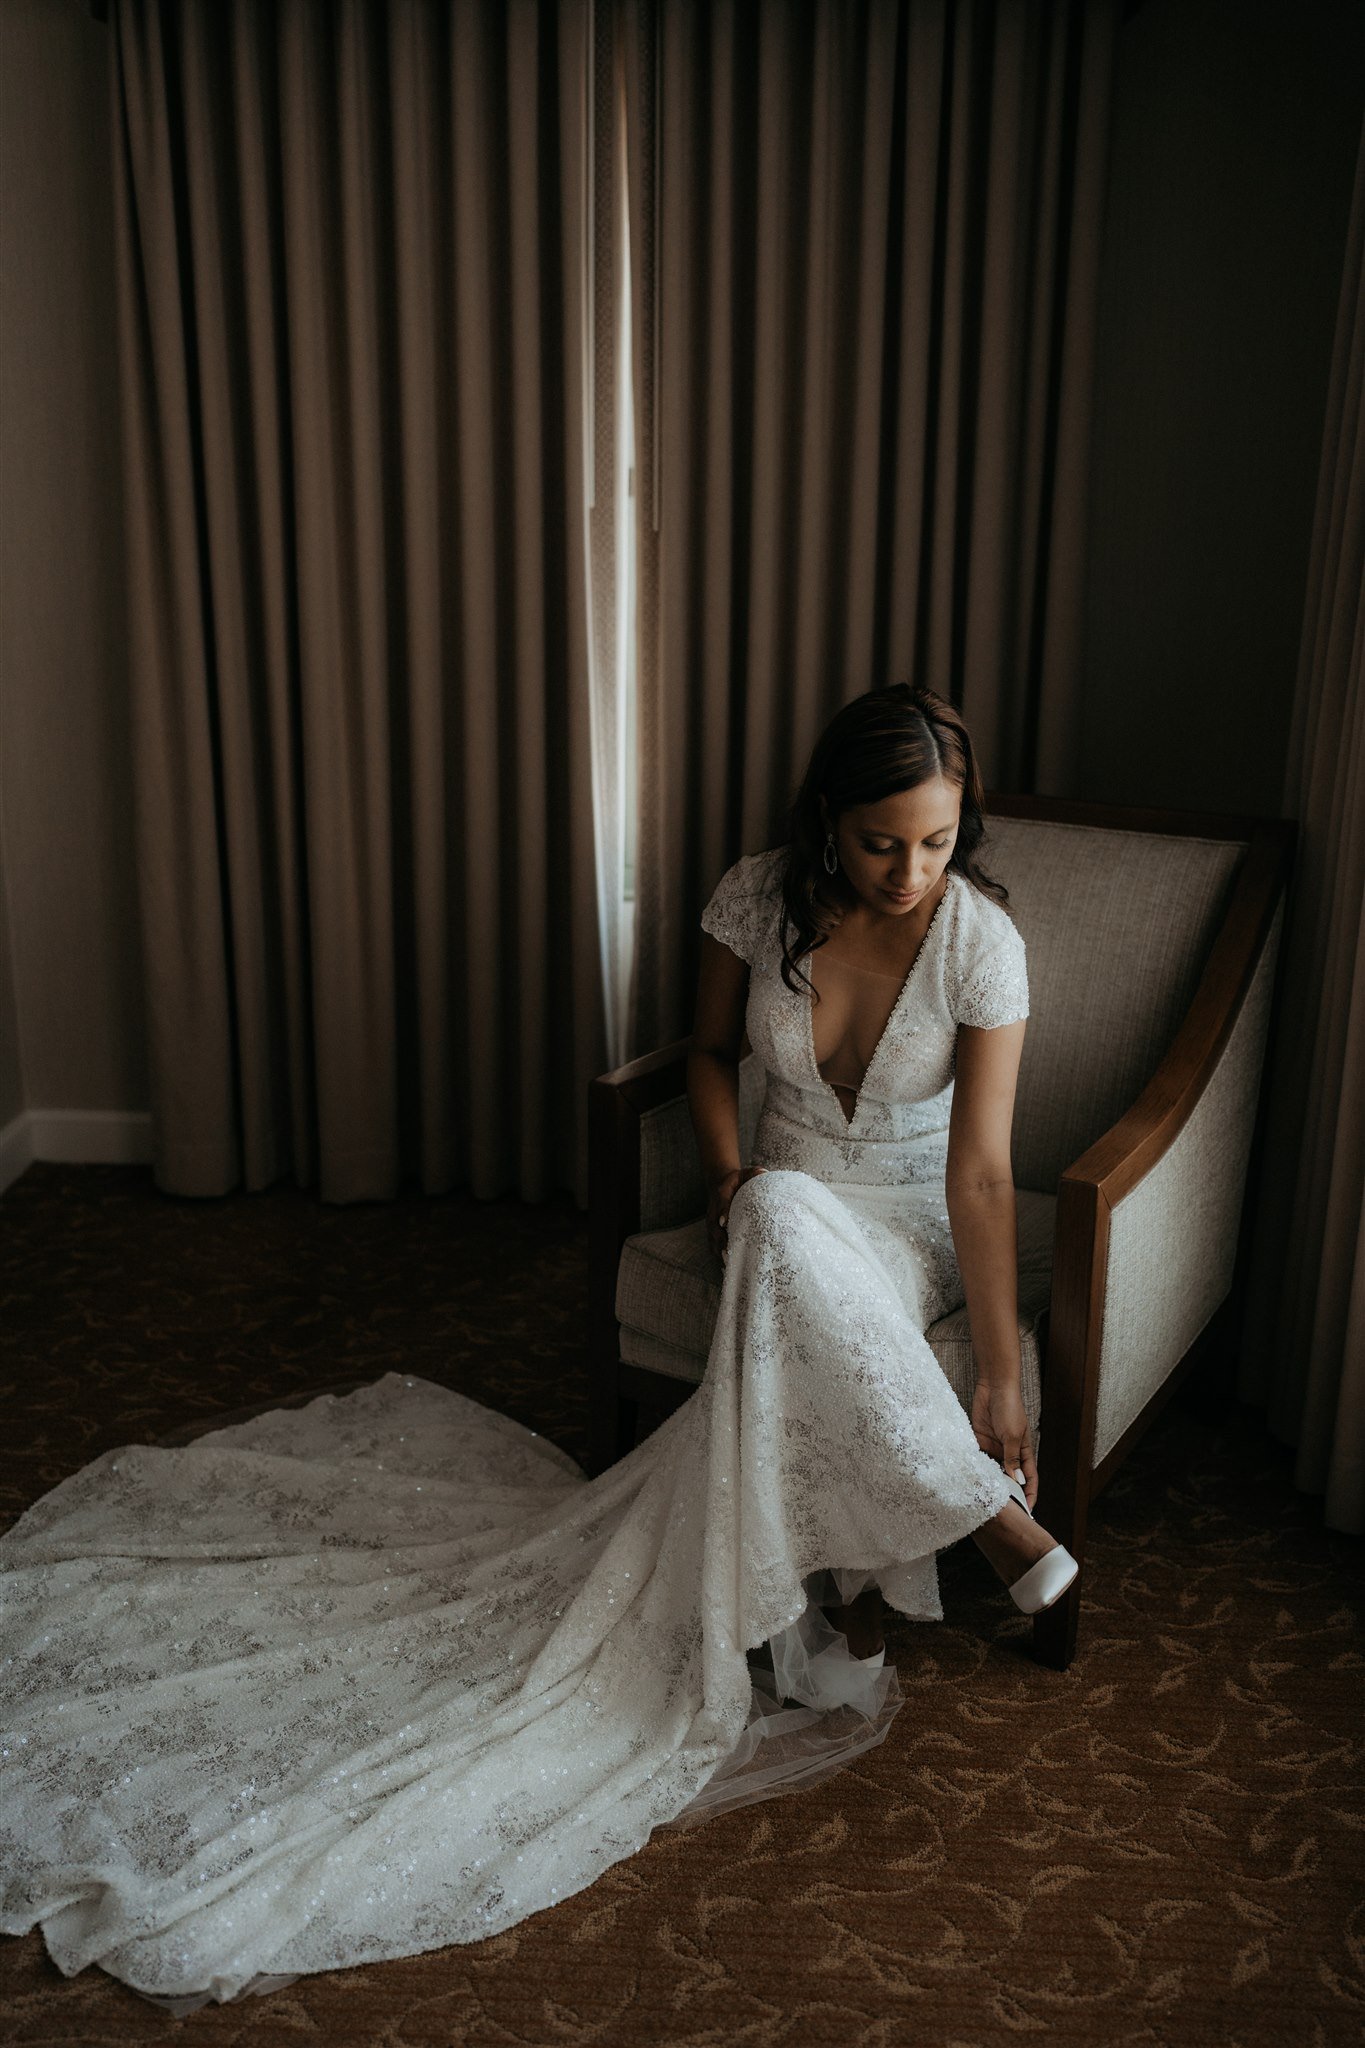 Bride in white sequin dress putting on white heels for Big Sur Elopement